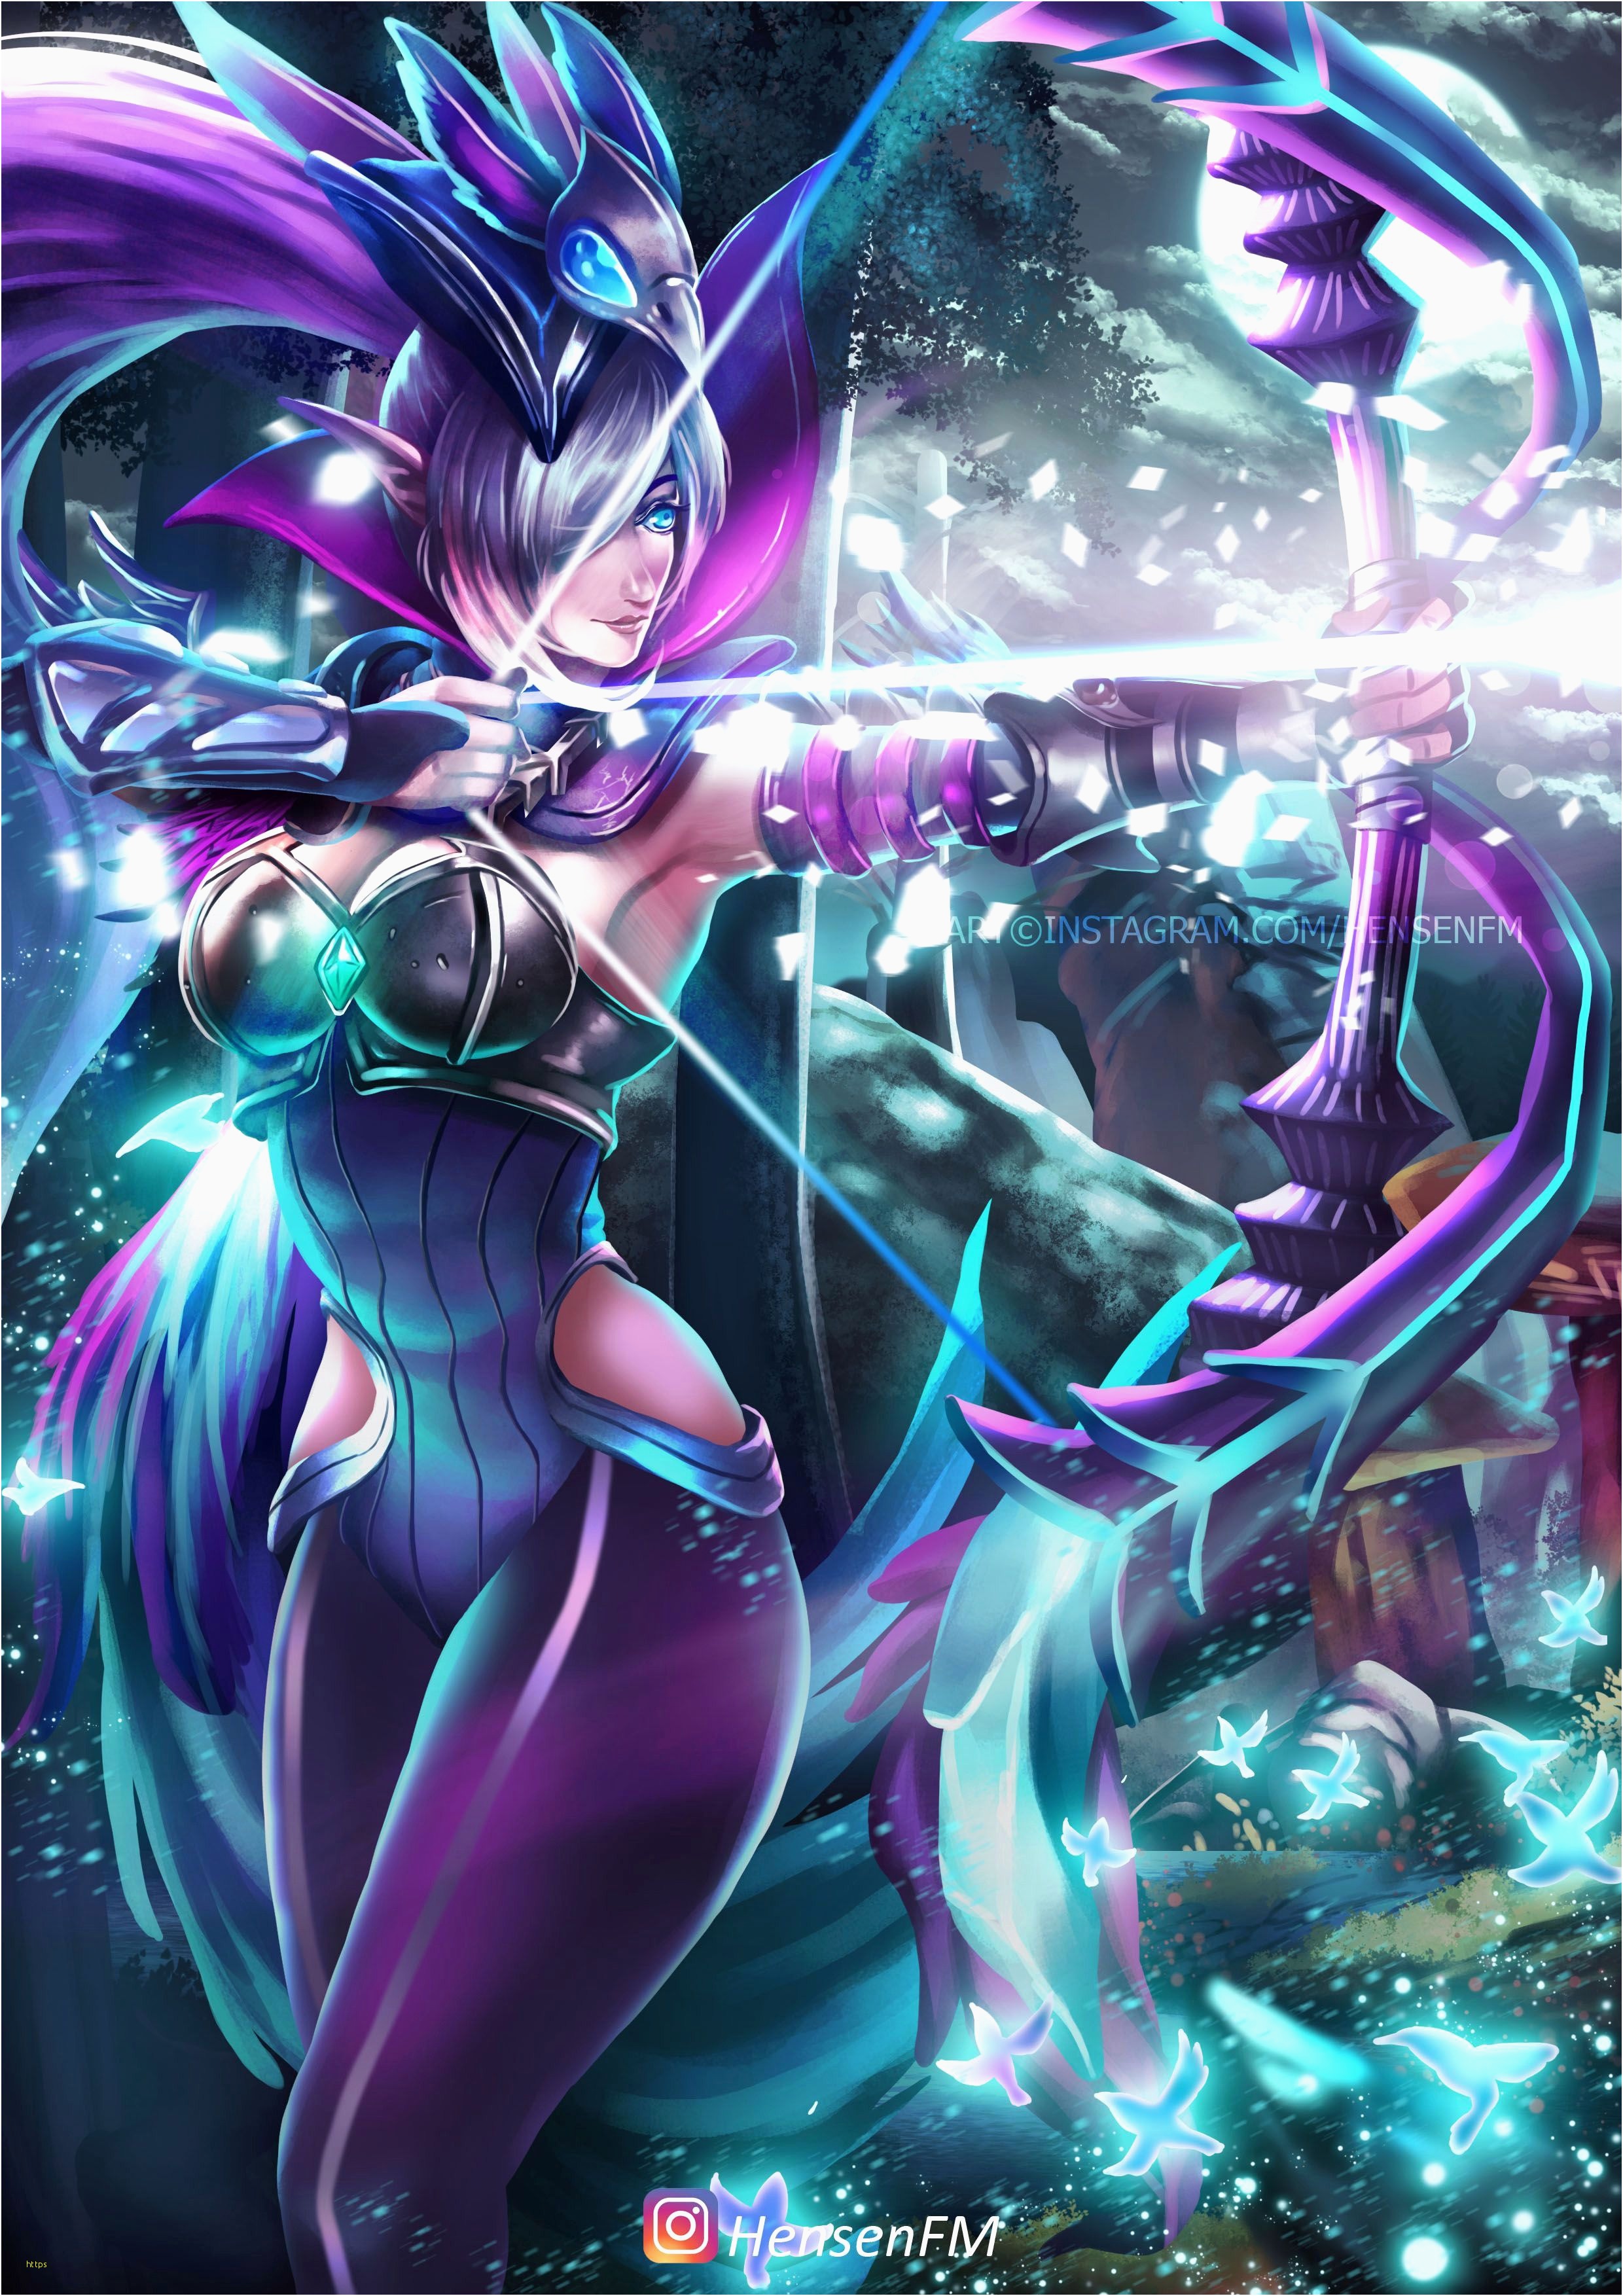 wallpaper for mobile android,cg artwork,purple,graphic design,violet,fictional character